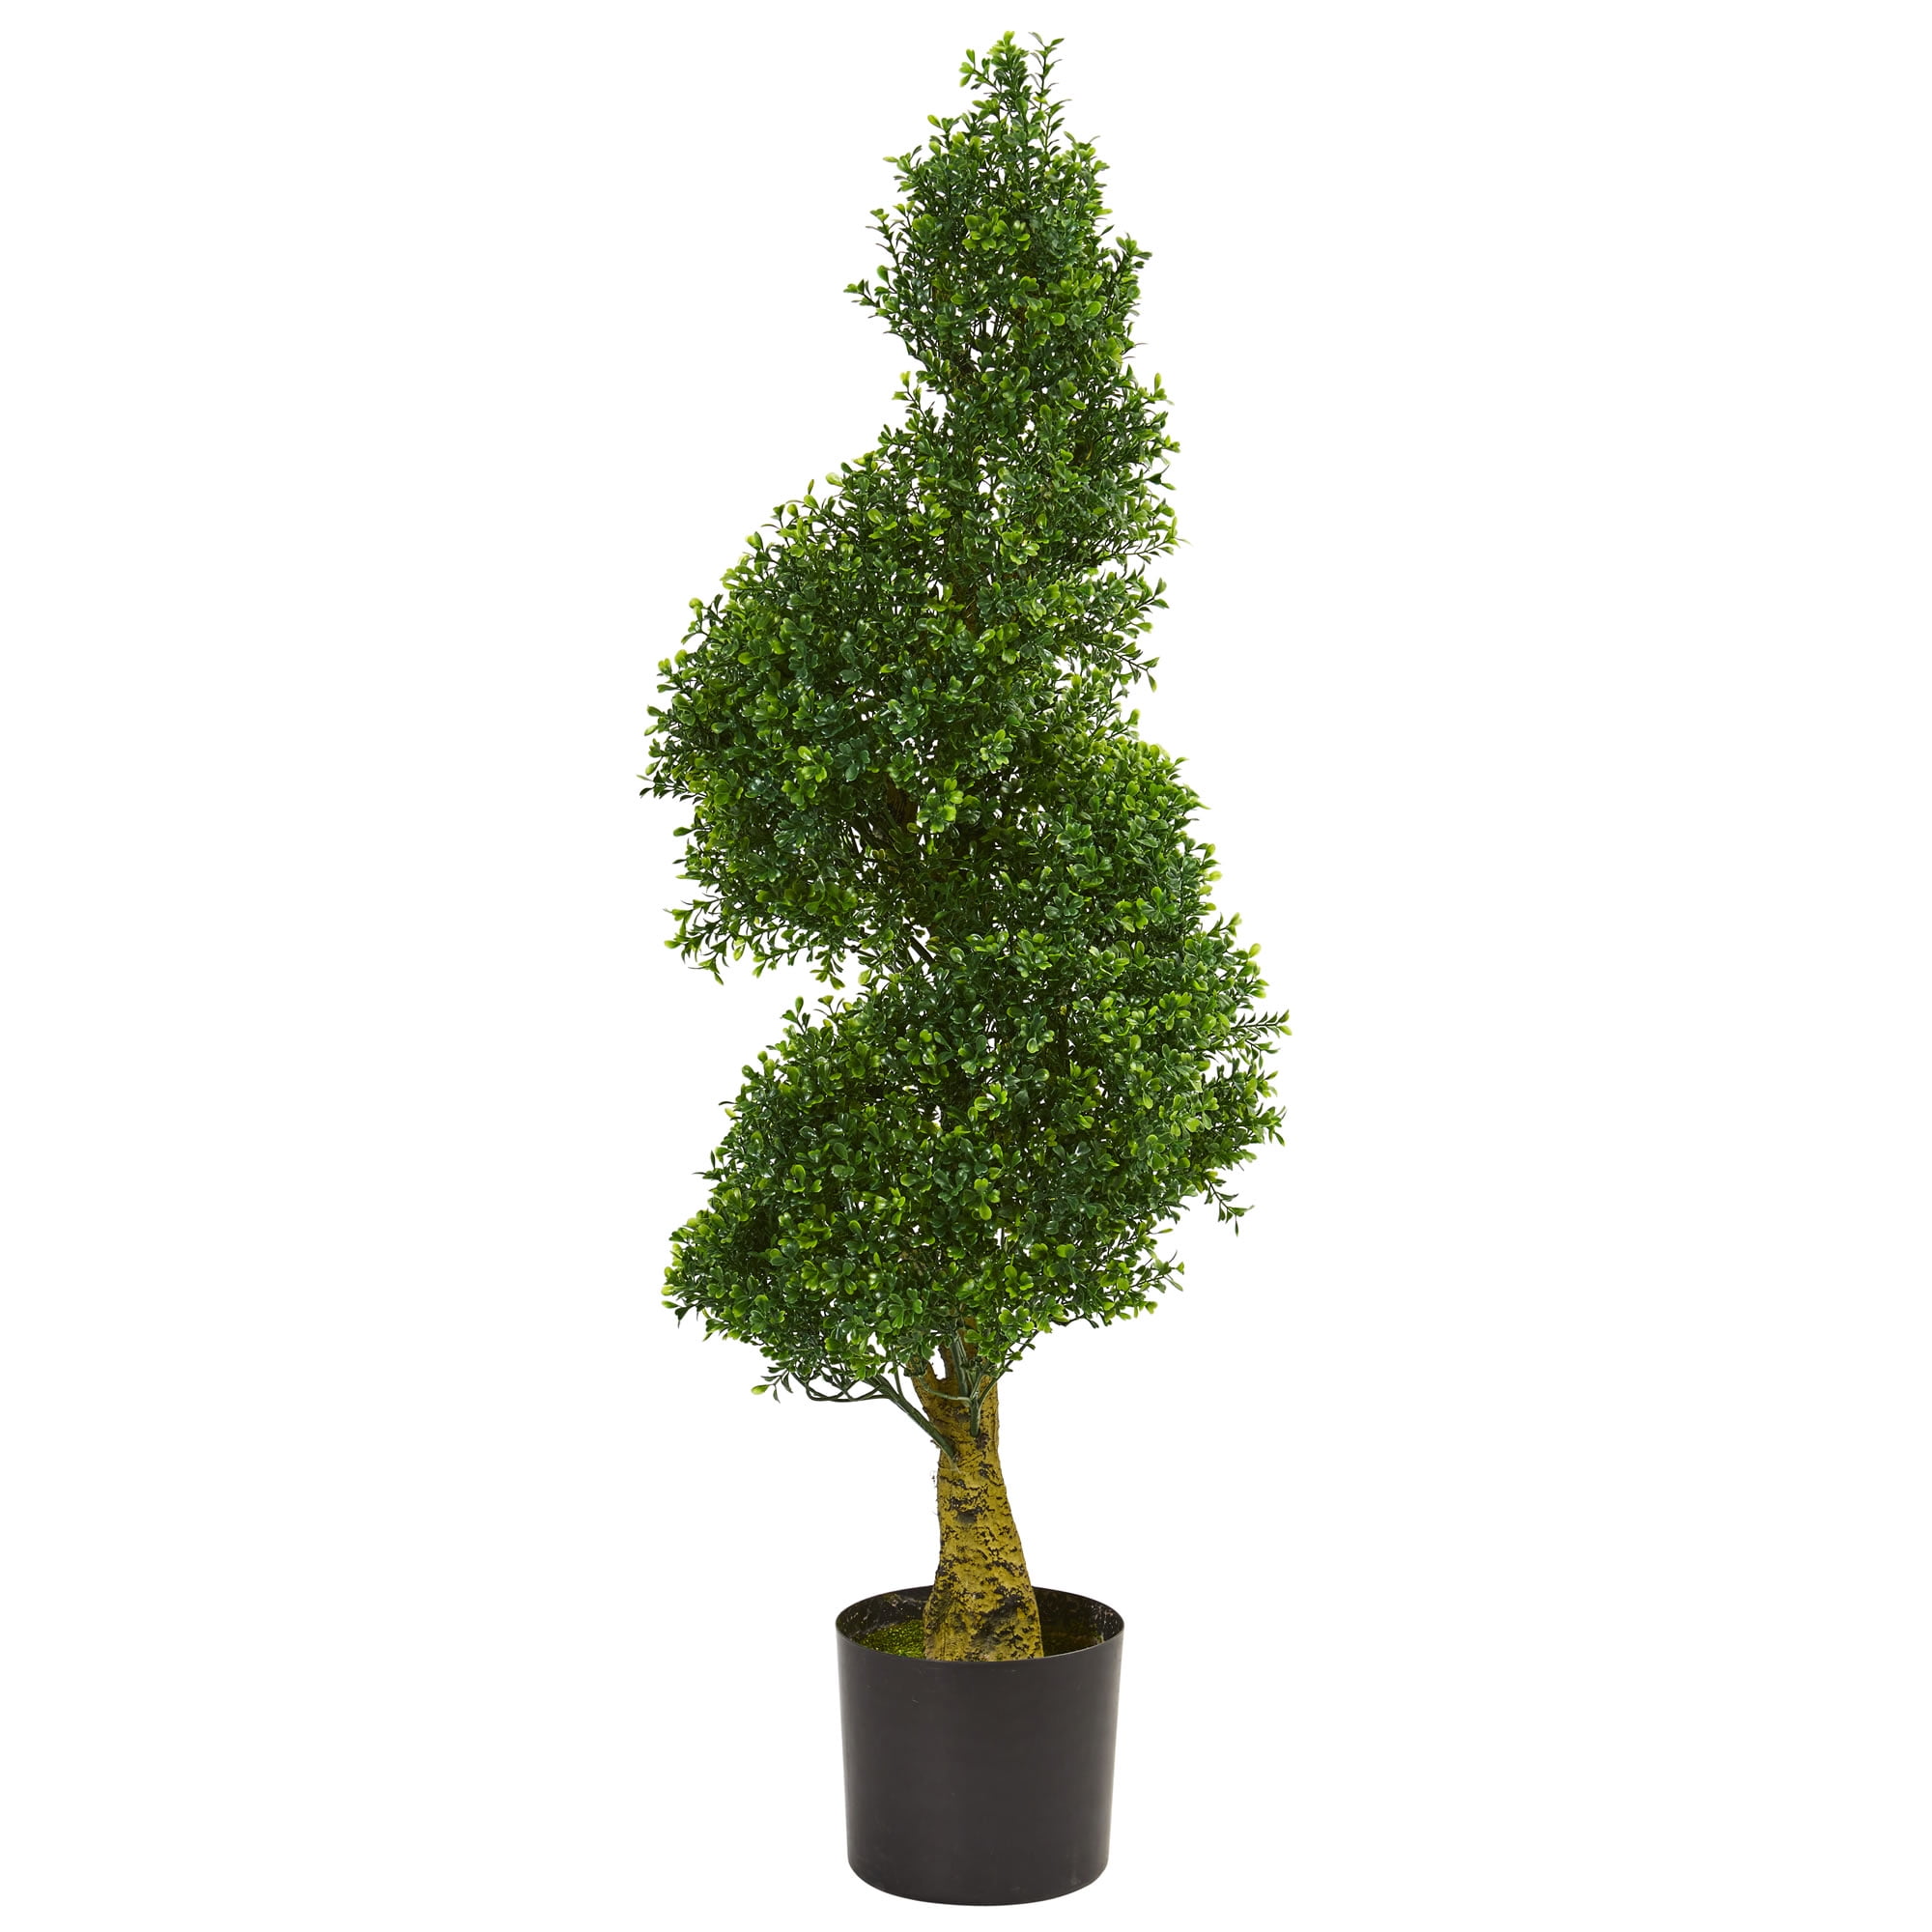 Tall artificial trees outdoor